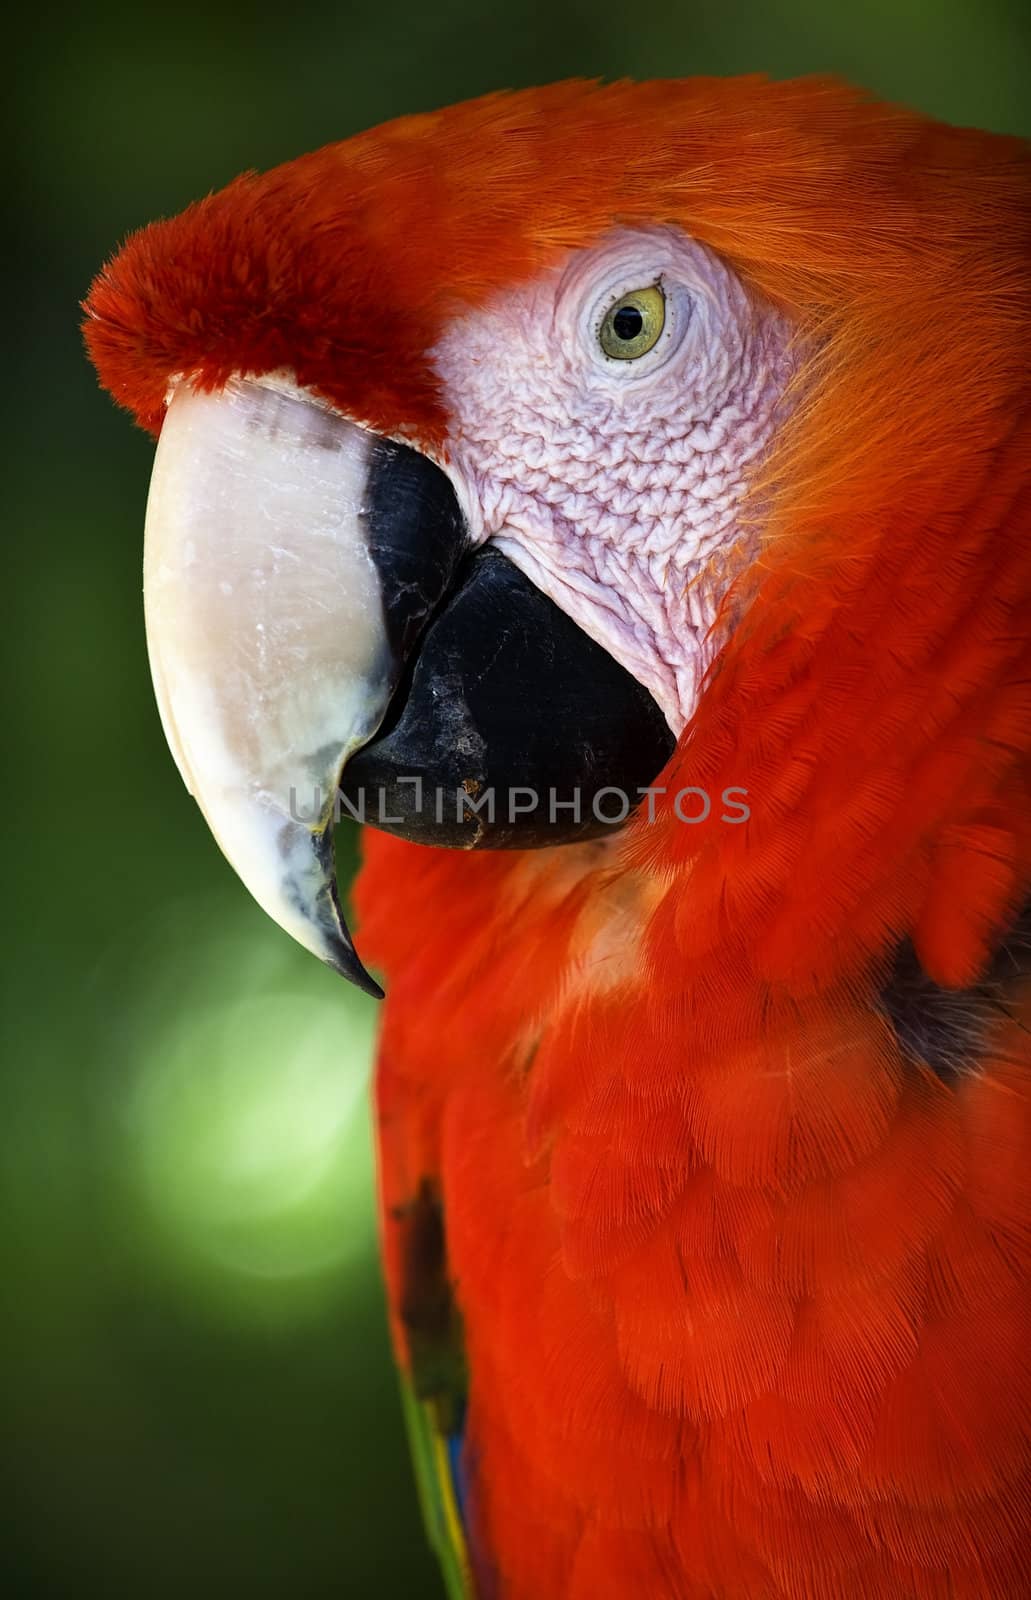 Scarlet Macaw Head White Beak Eye Red Plumage Close Up

Resubmit--In response to comments from reviewer have further processed image to reduce noise, sharpen focus and adjust lighting.